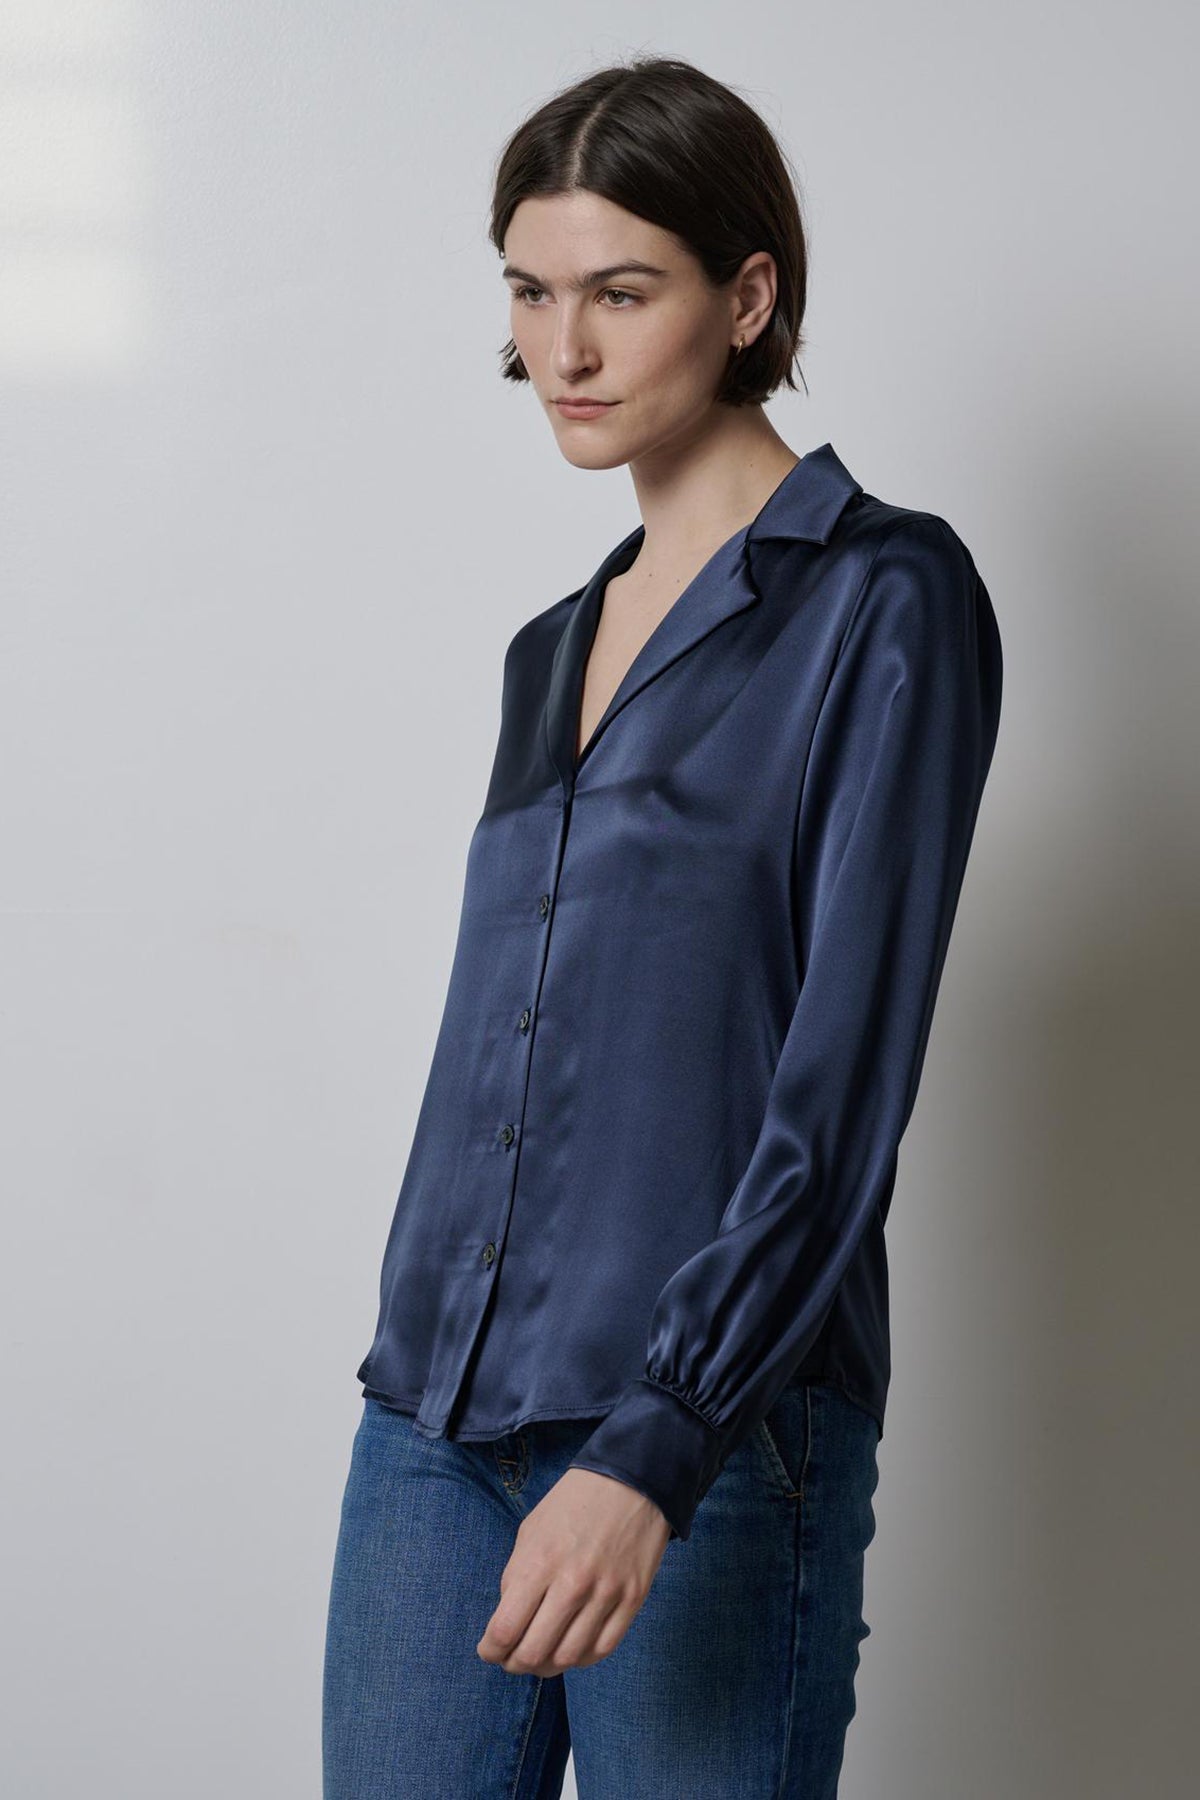 The model is wearing the Velvet by Jenny Graham SOHO TOP, a timeless button up.-35548175139009